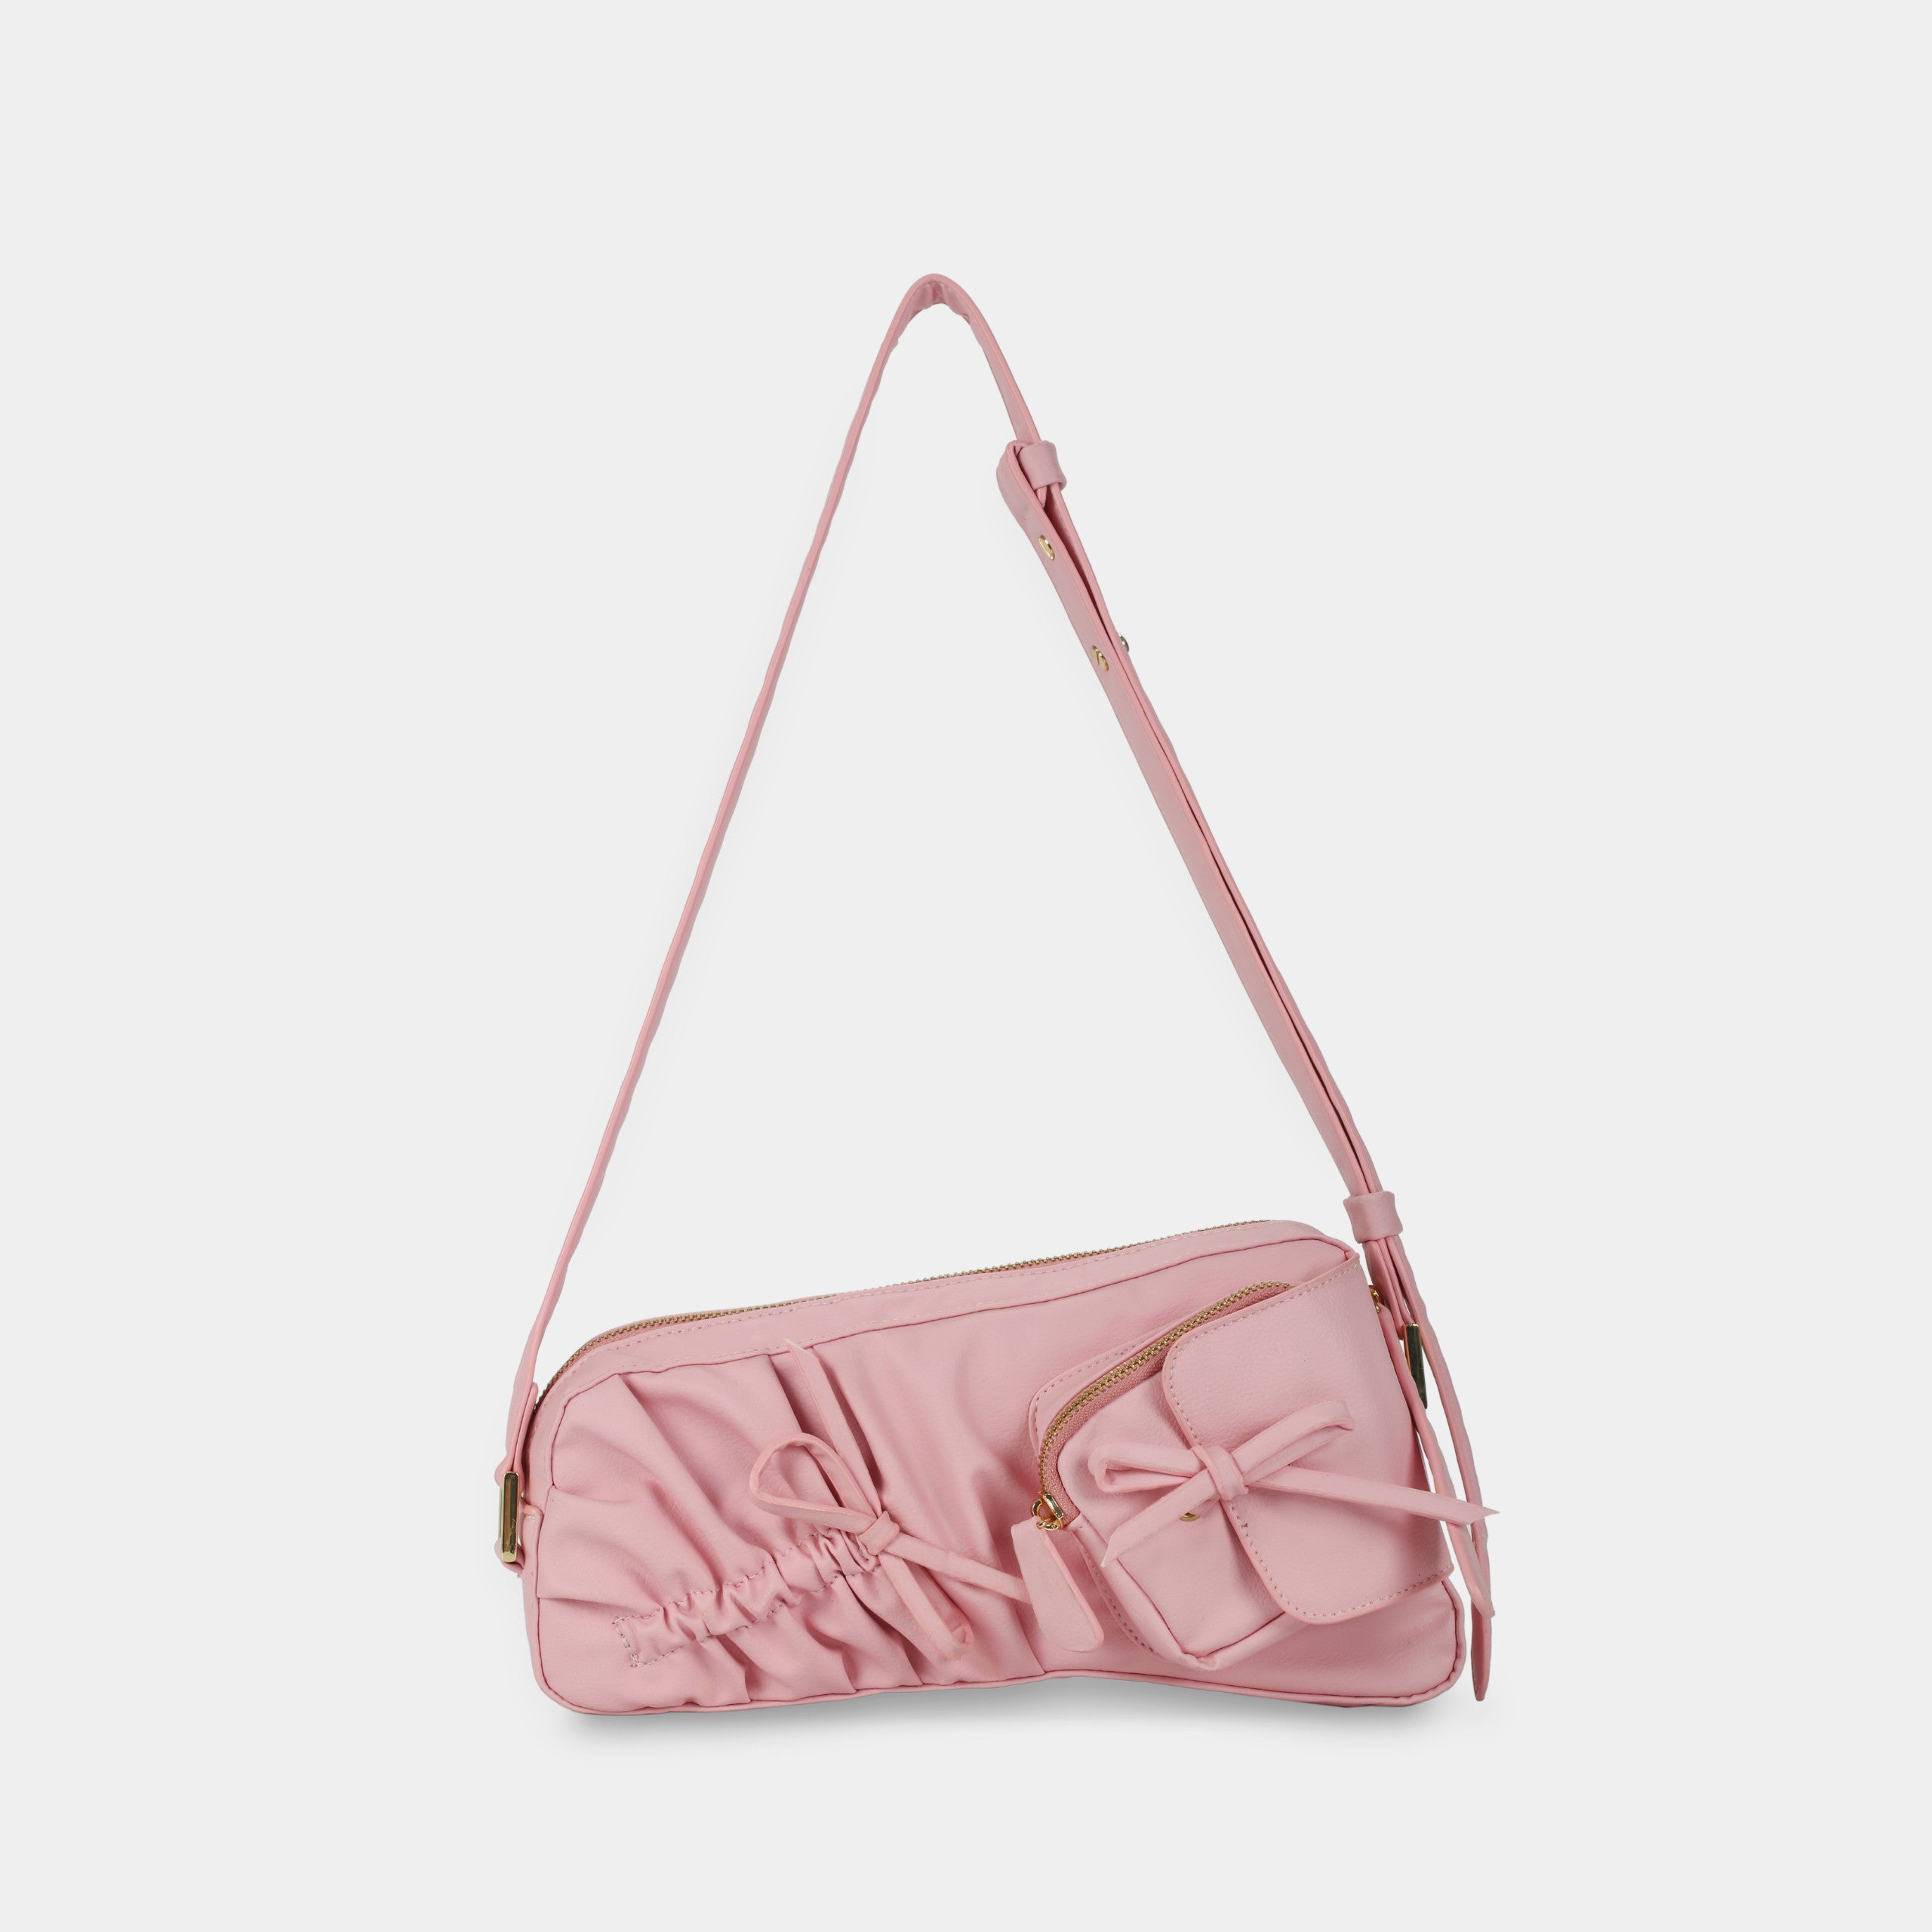 Freely Bag with Bow in Pink